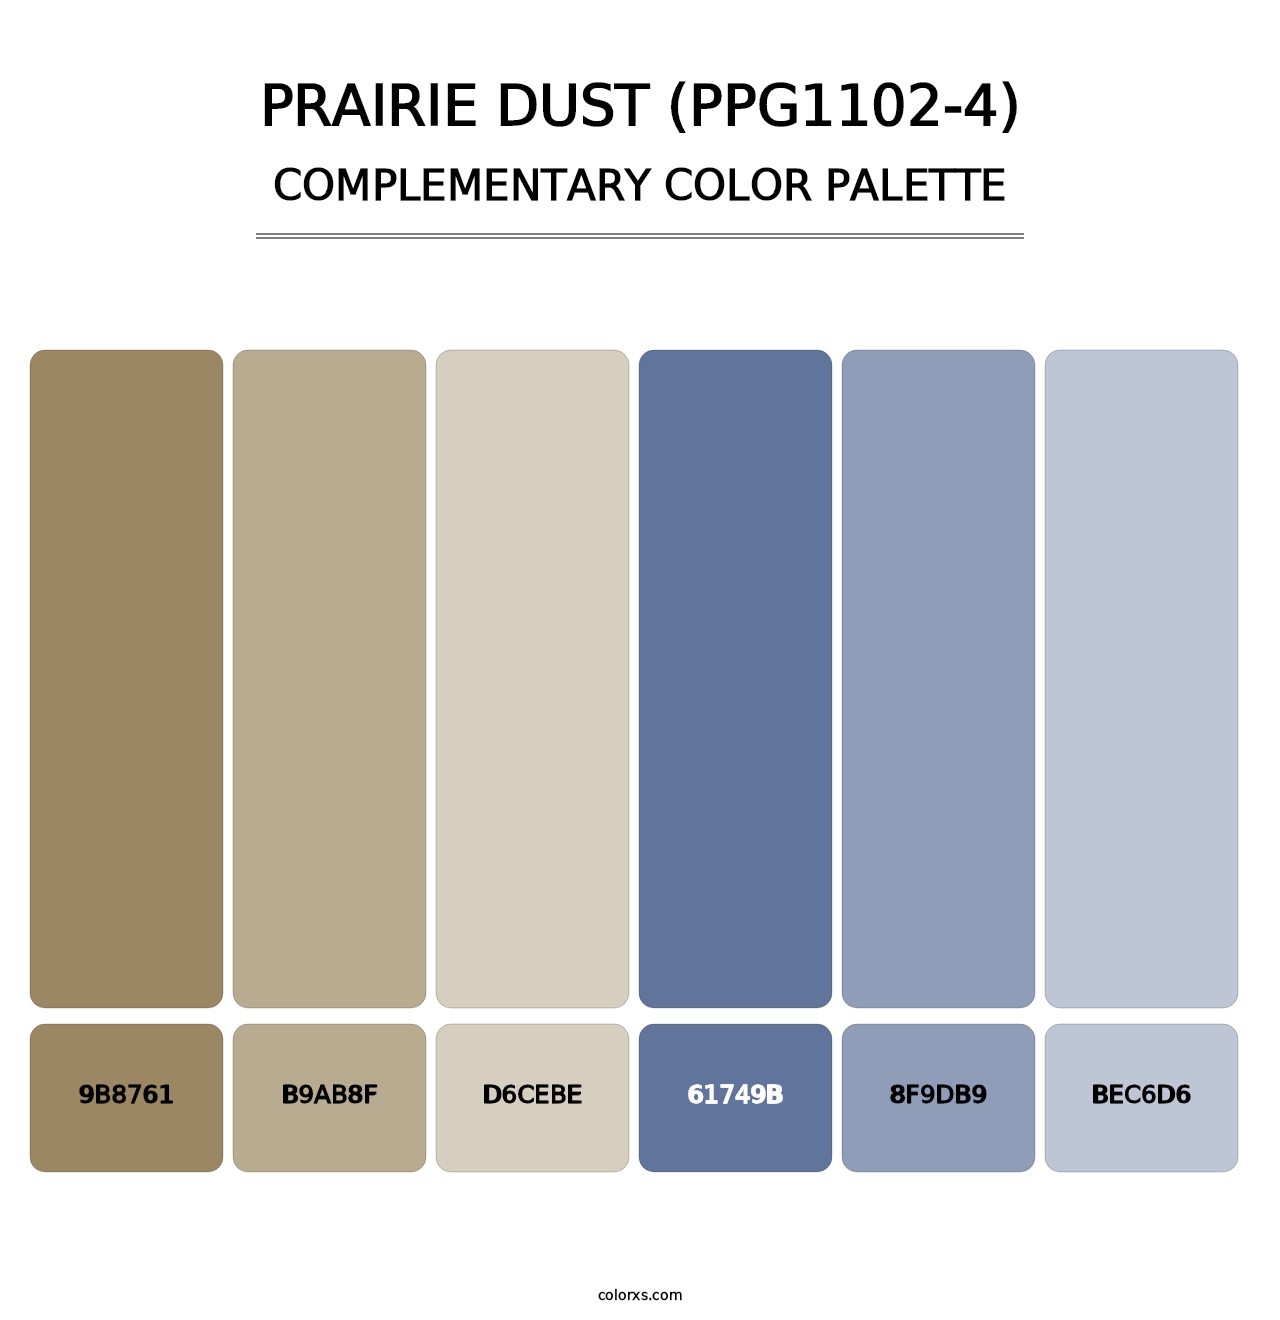 Prairie Dust (PPG1102-4) - Complementary Color Palette